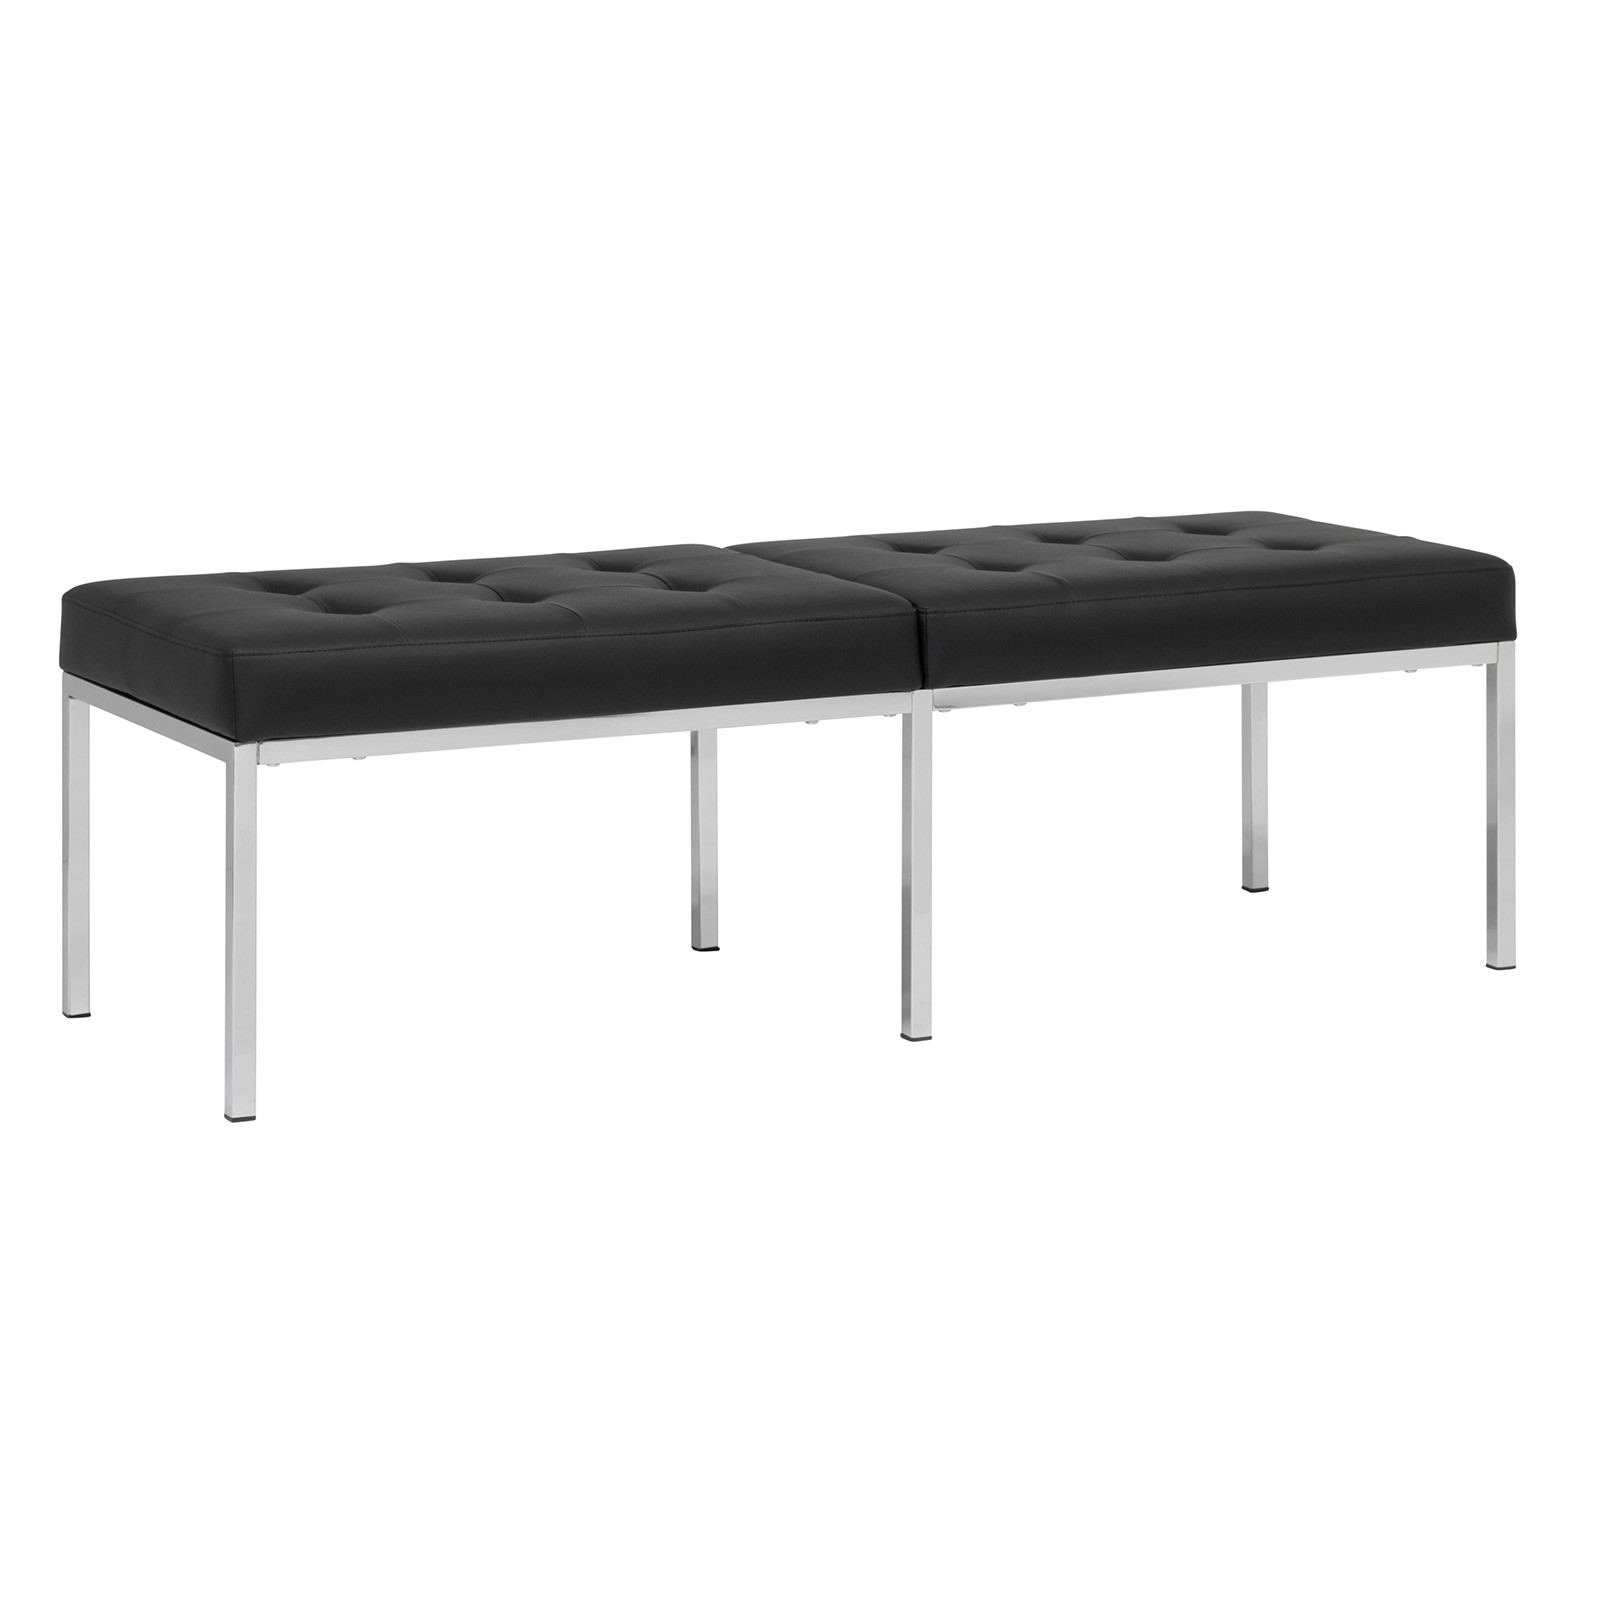 72150 Camber Bench